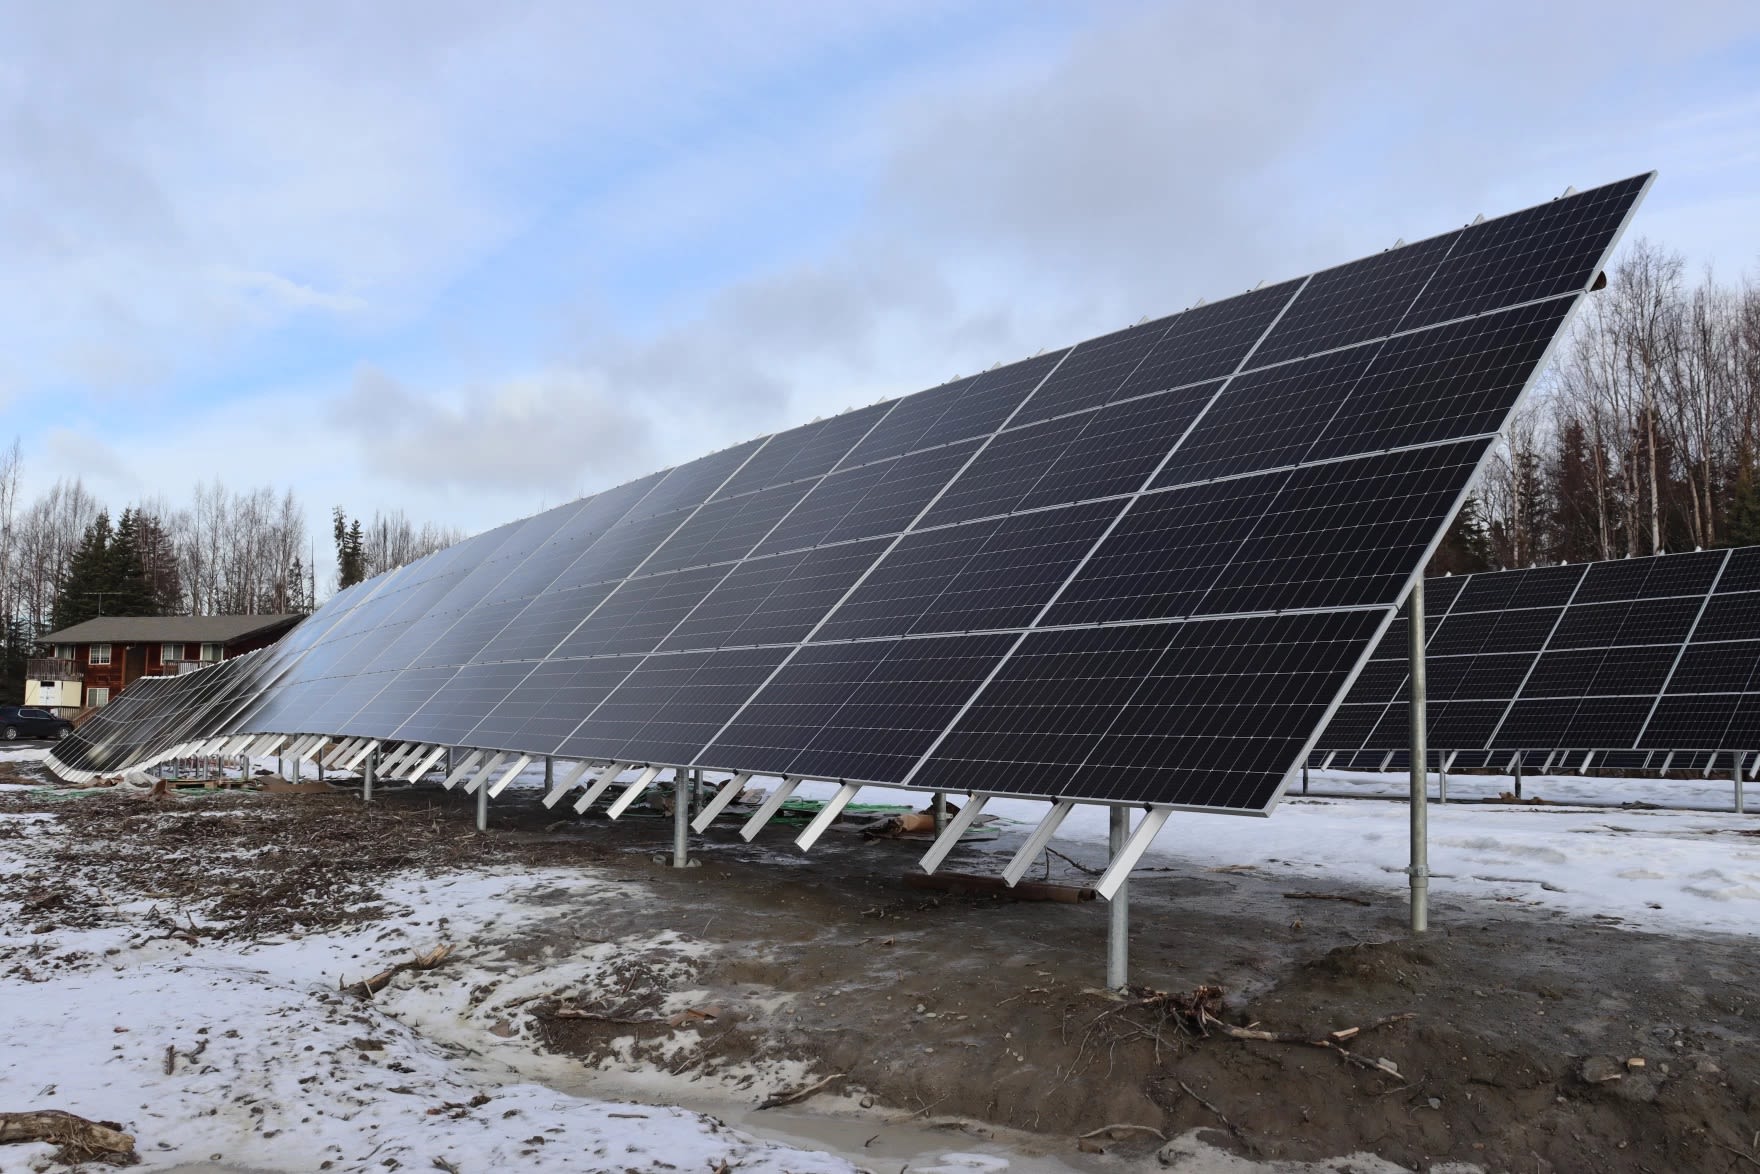 A bill to support community solar projects in Alaska appears close to becoming law